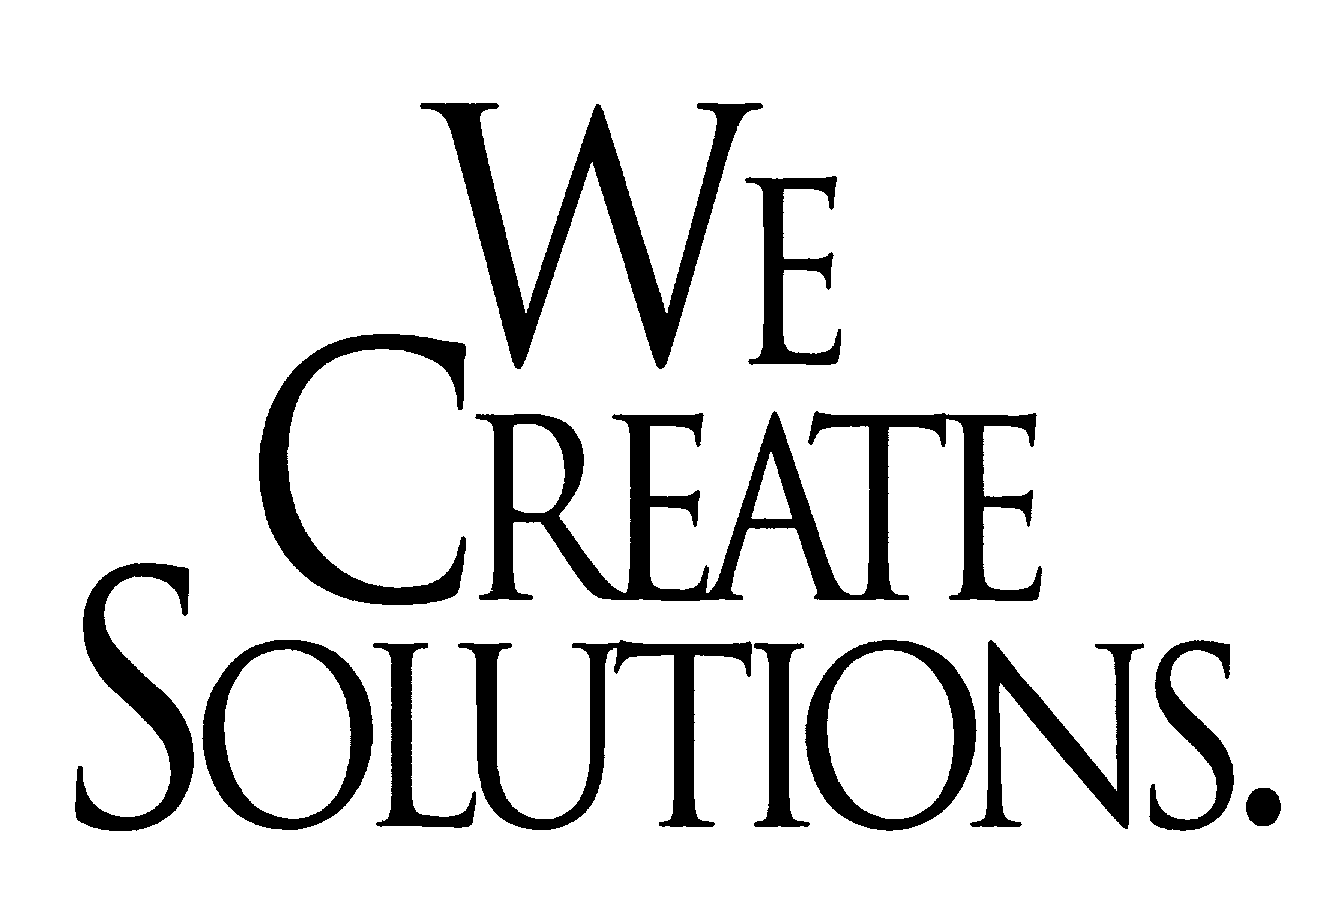  WE CREATE SOLUTIONS.